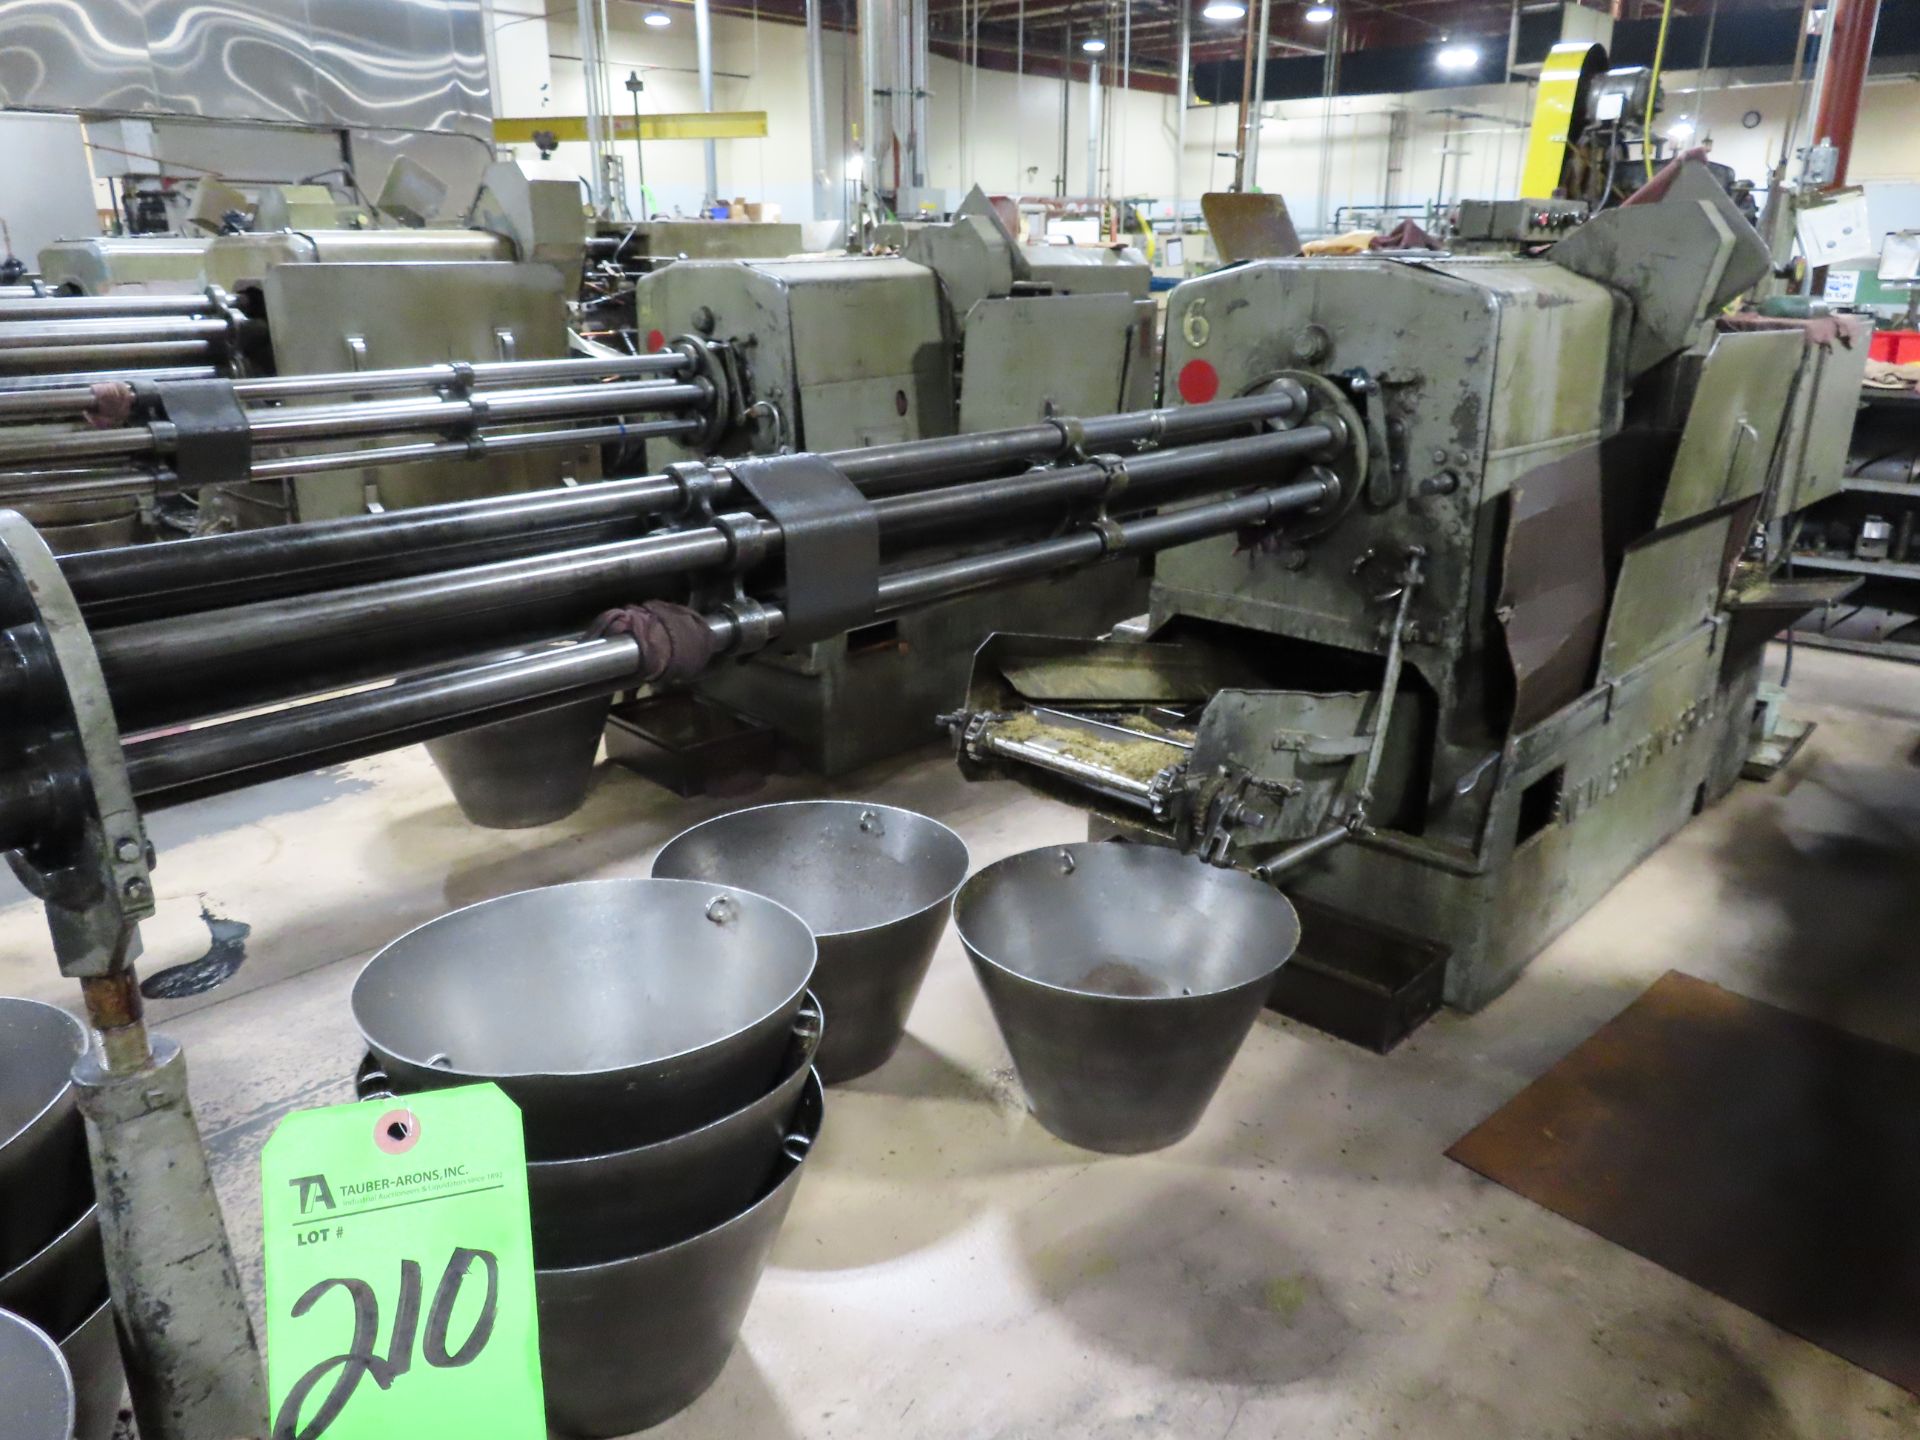 New Britain Gridley mod. 60, 1'', 6-Spindle